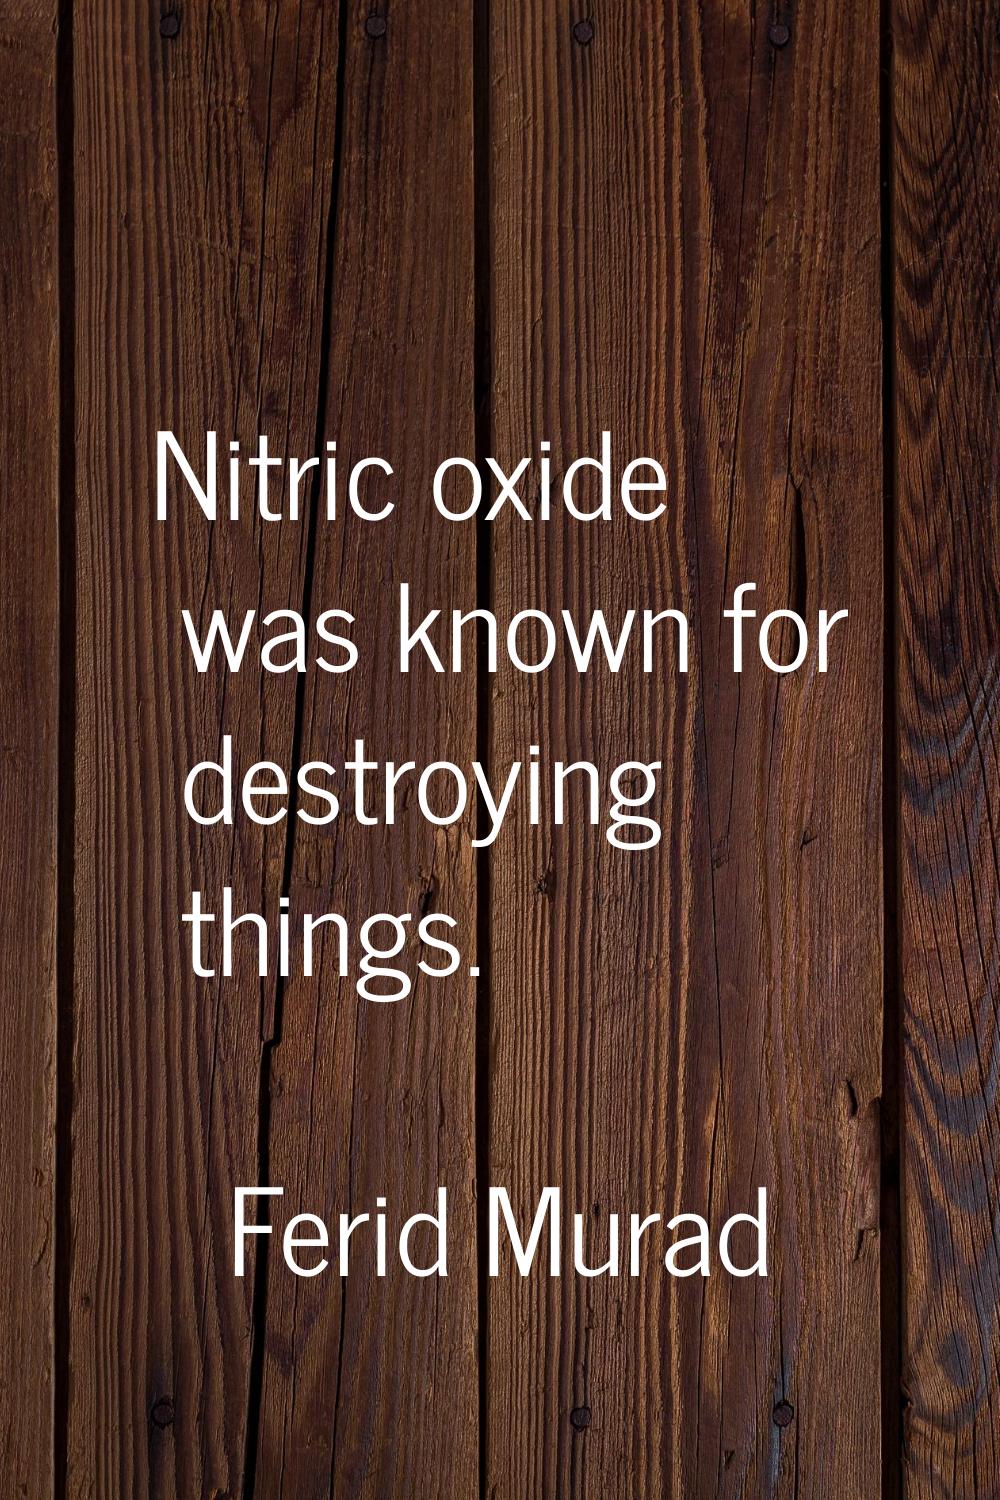 Nitric oxide was known for destroying things.